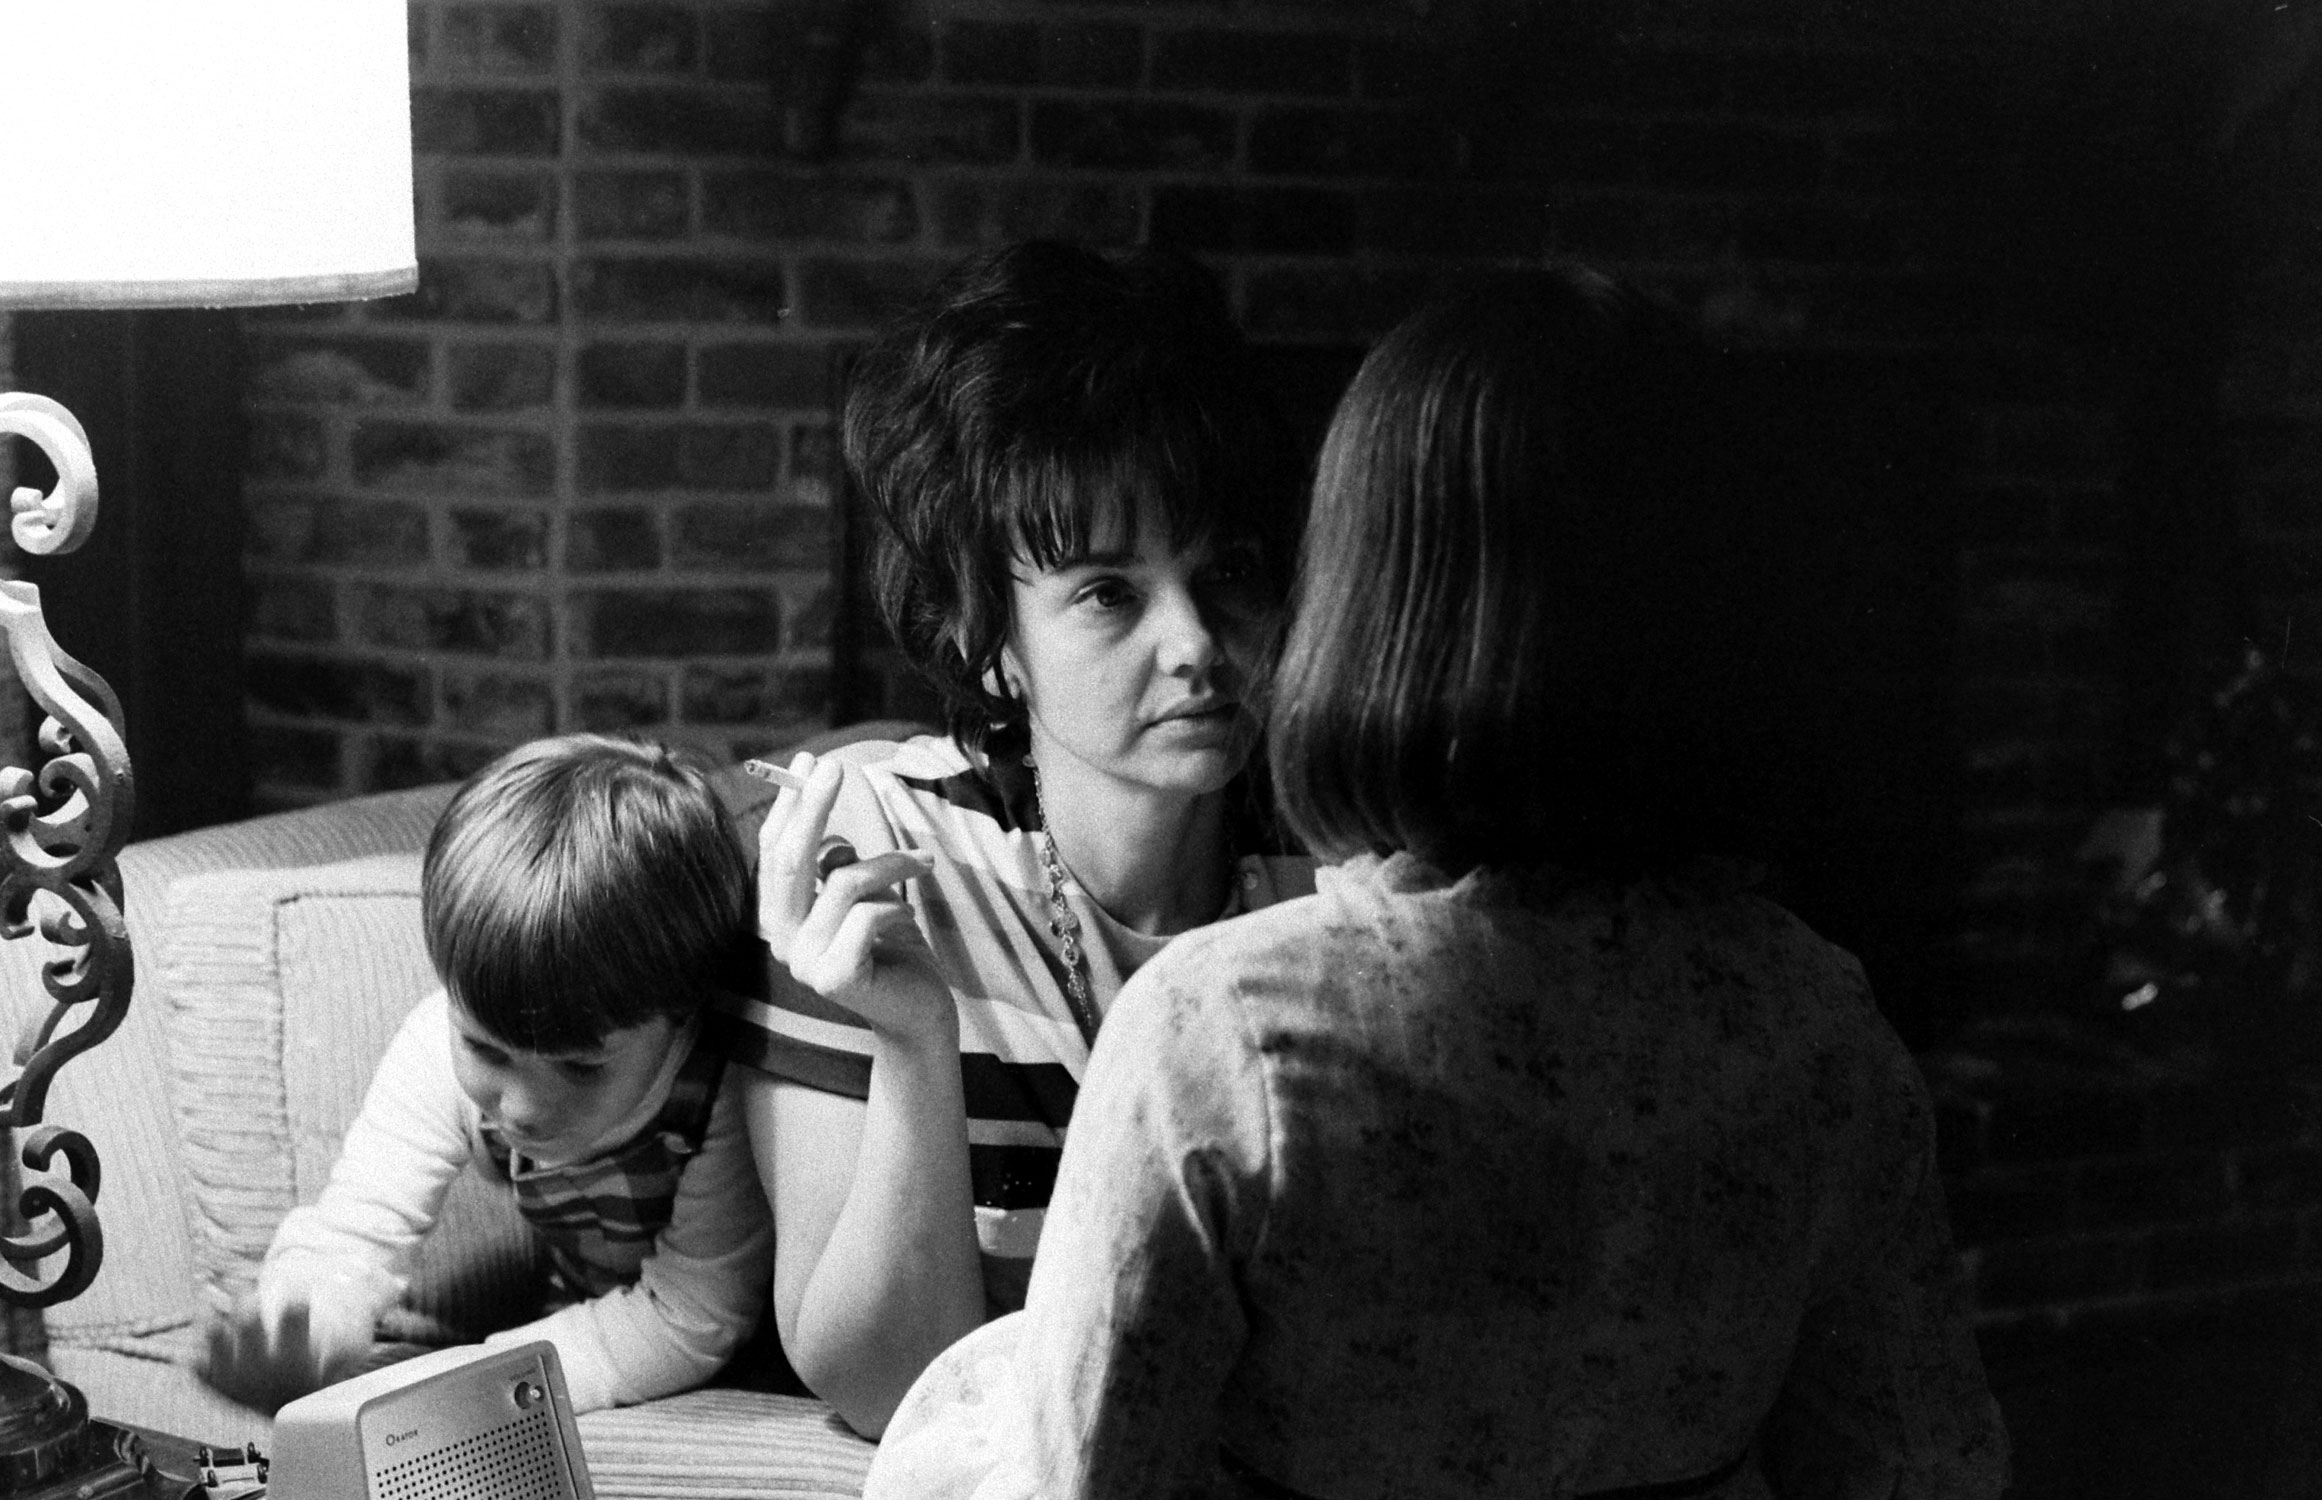 Astronaut James Lovell's family at home during the Apollo 13 crisis, April 1970.